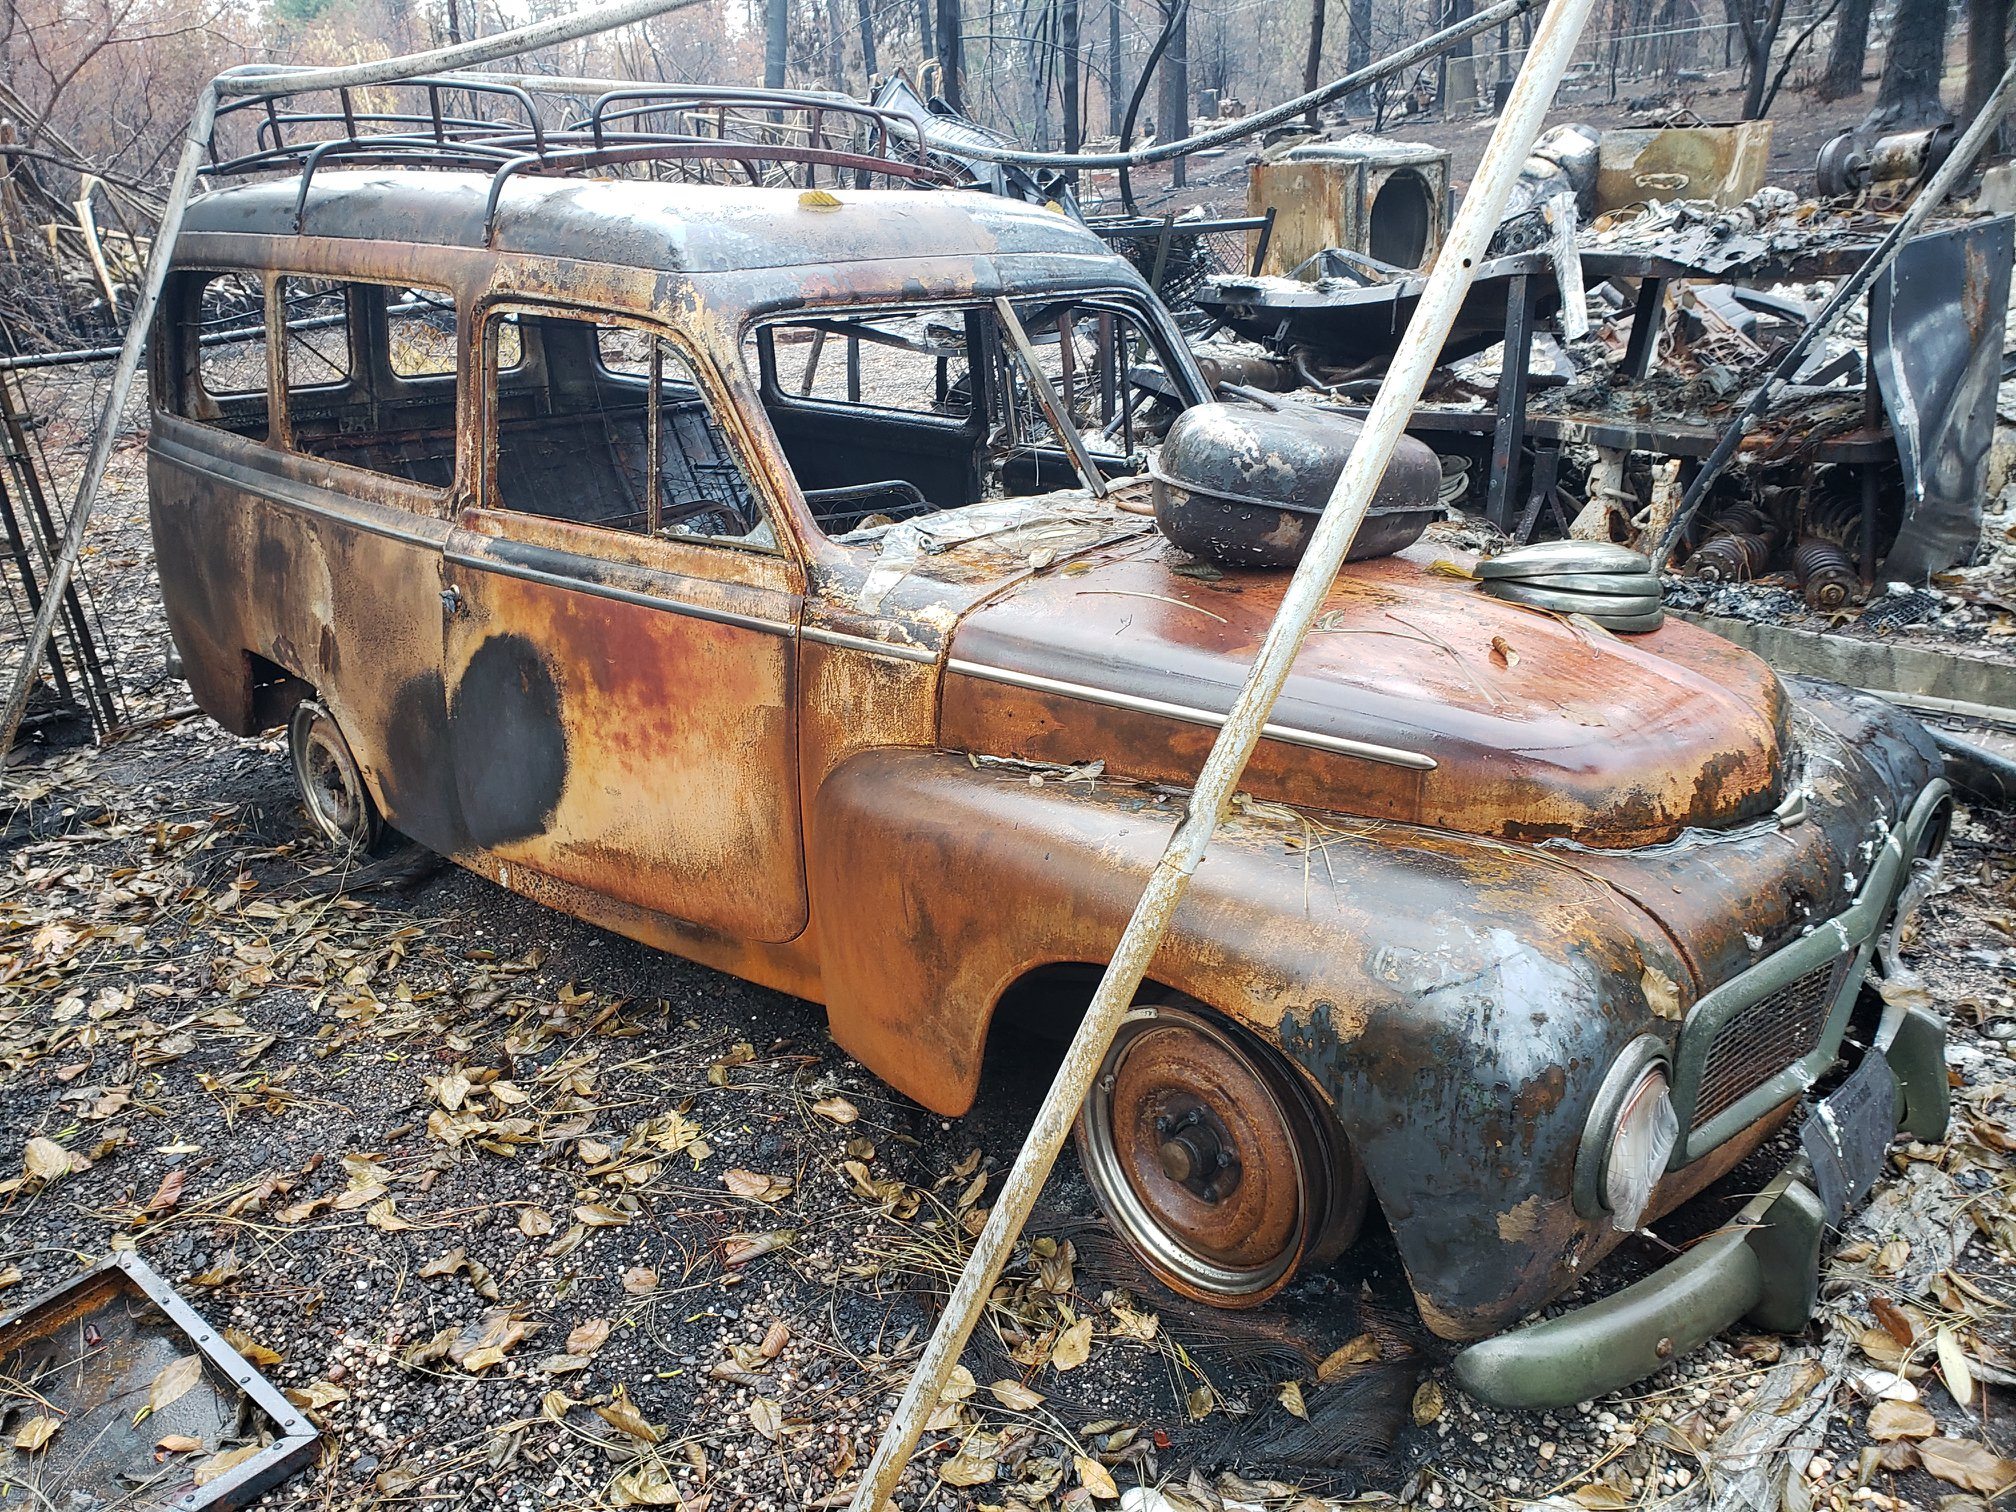 The Volvo Duett that was rescued from wildfire hell